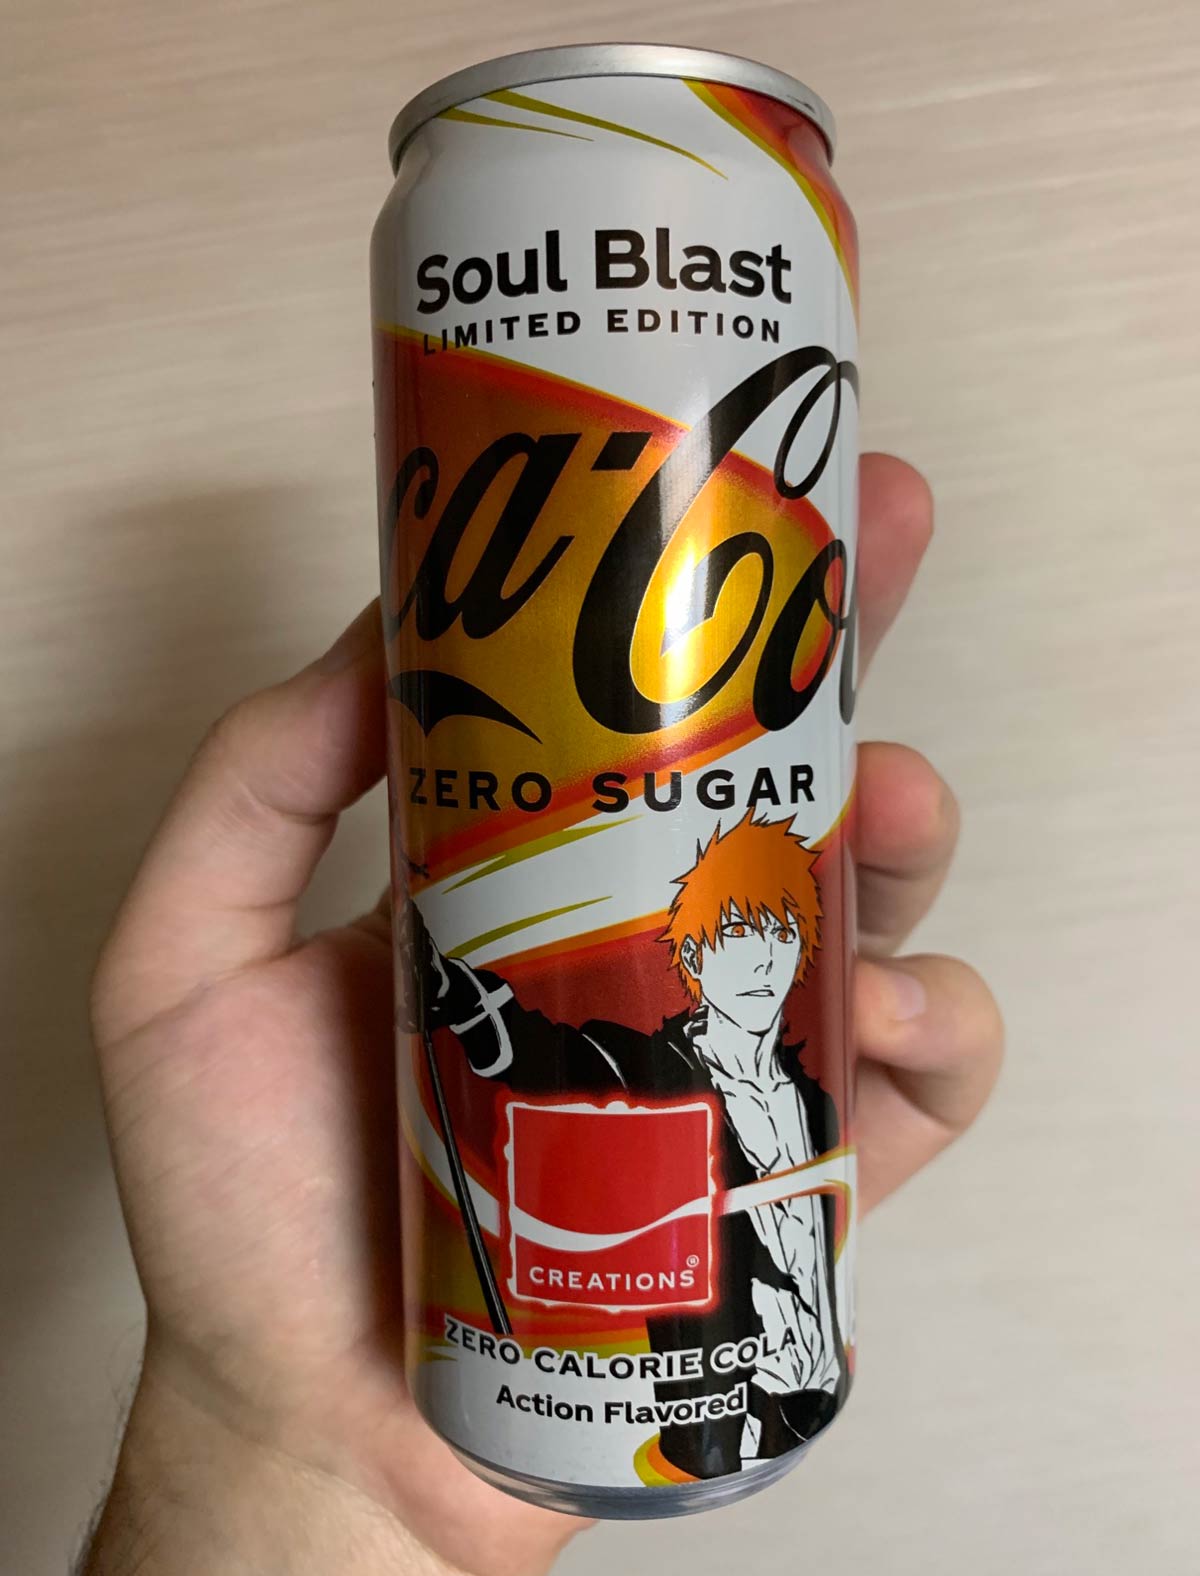 I’m in Japan we have “Action Flavored” coke at the moment